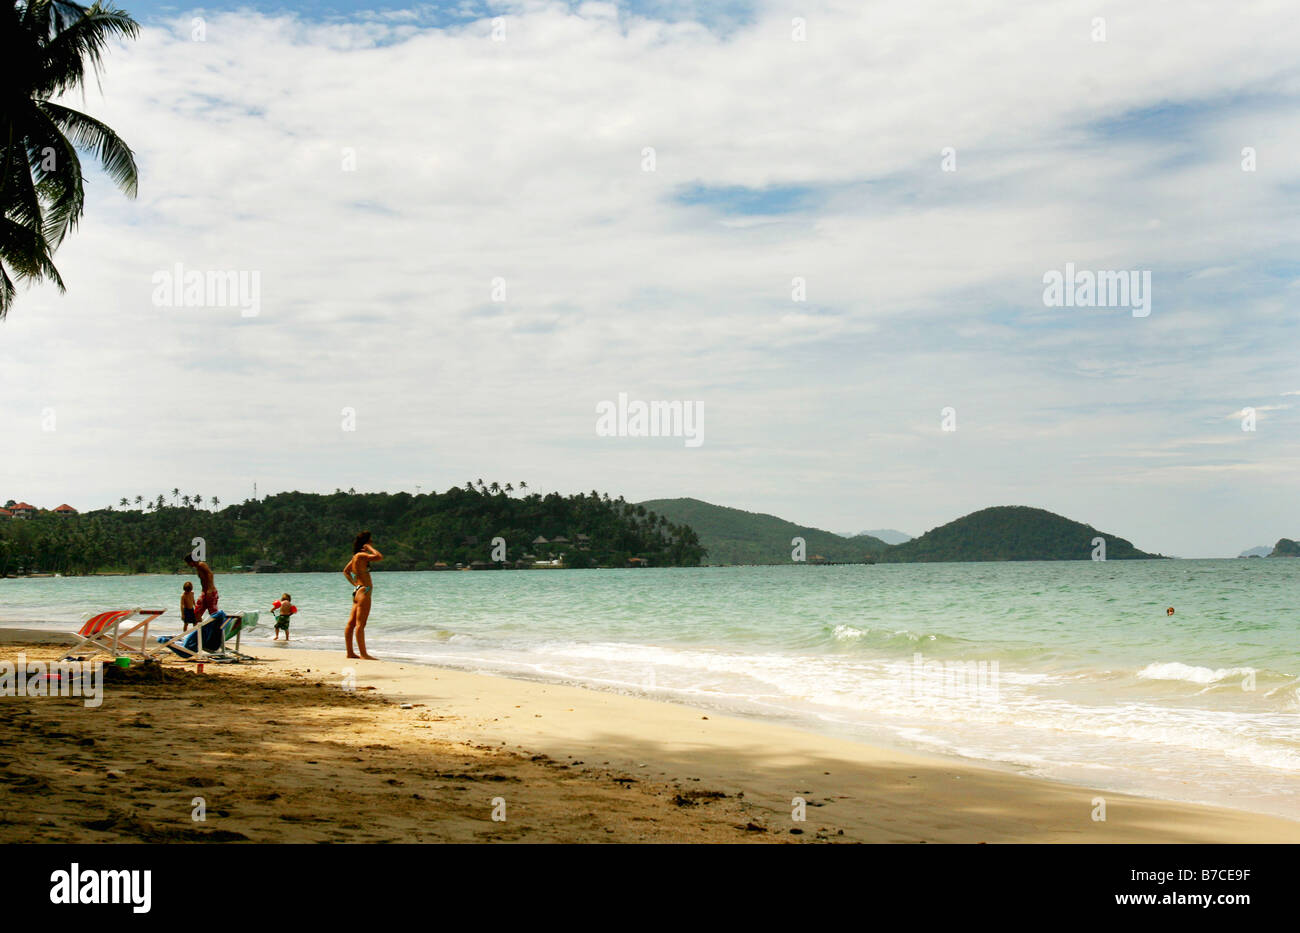 A family on holiday at the beach on Koh Mak island Thailand, south east Asia. Stock Photo